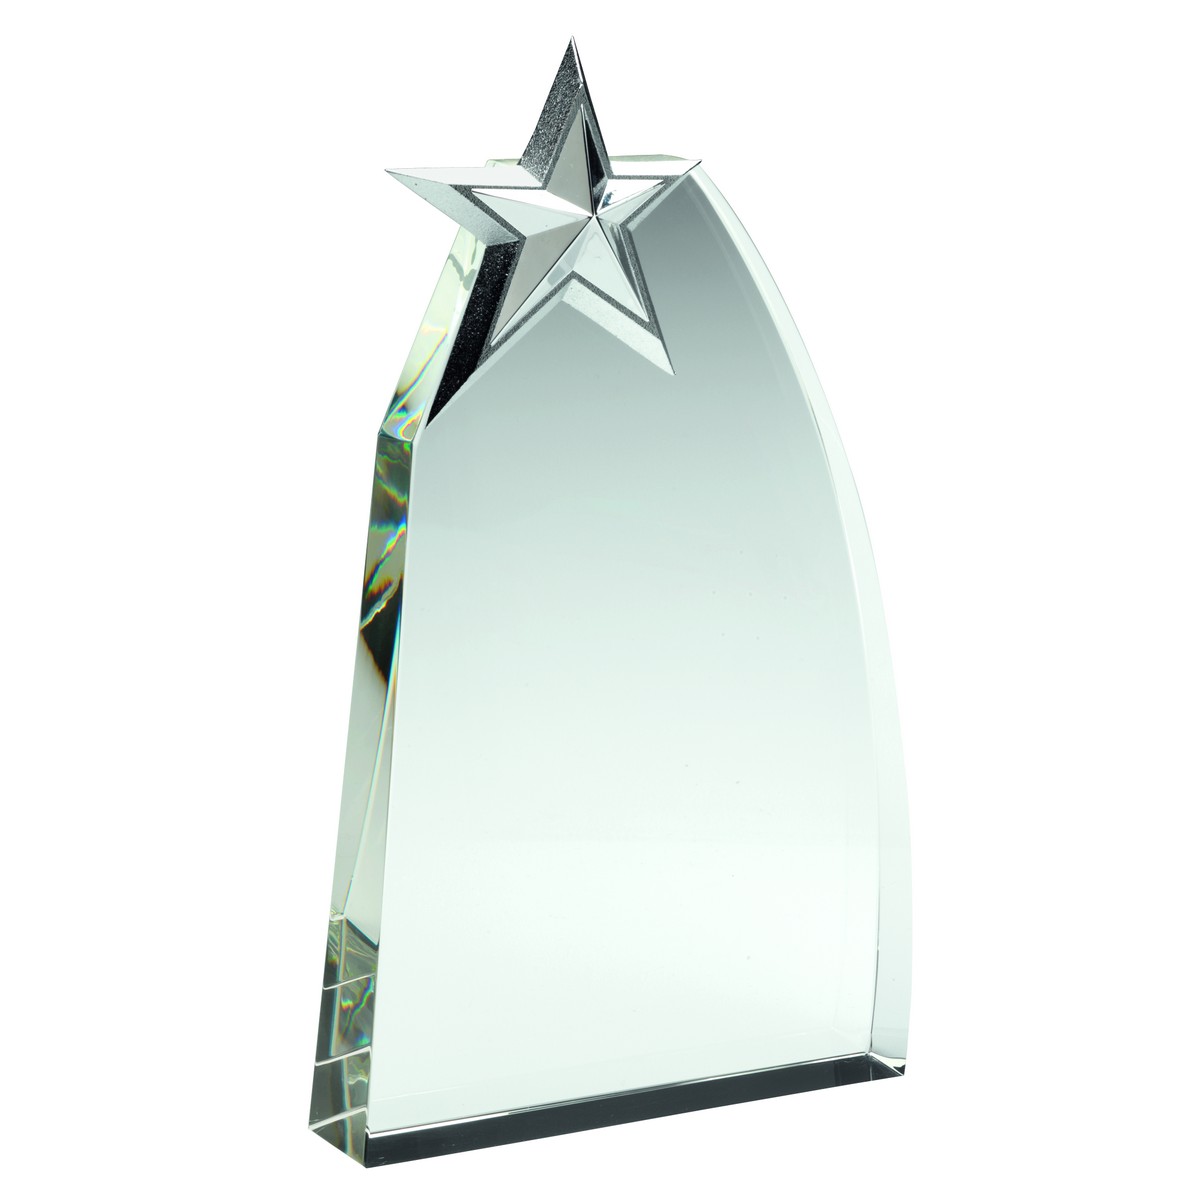 CLEAR GLASS WEDGE WITH DETAILED METAL STAR